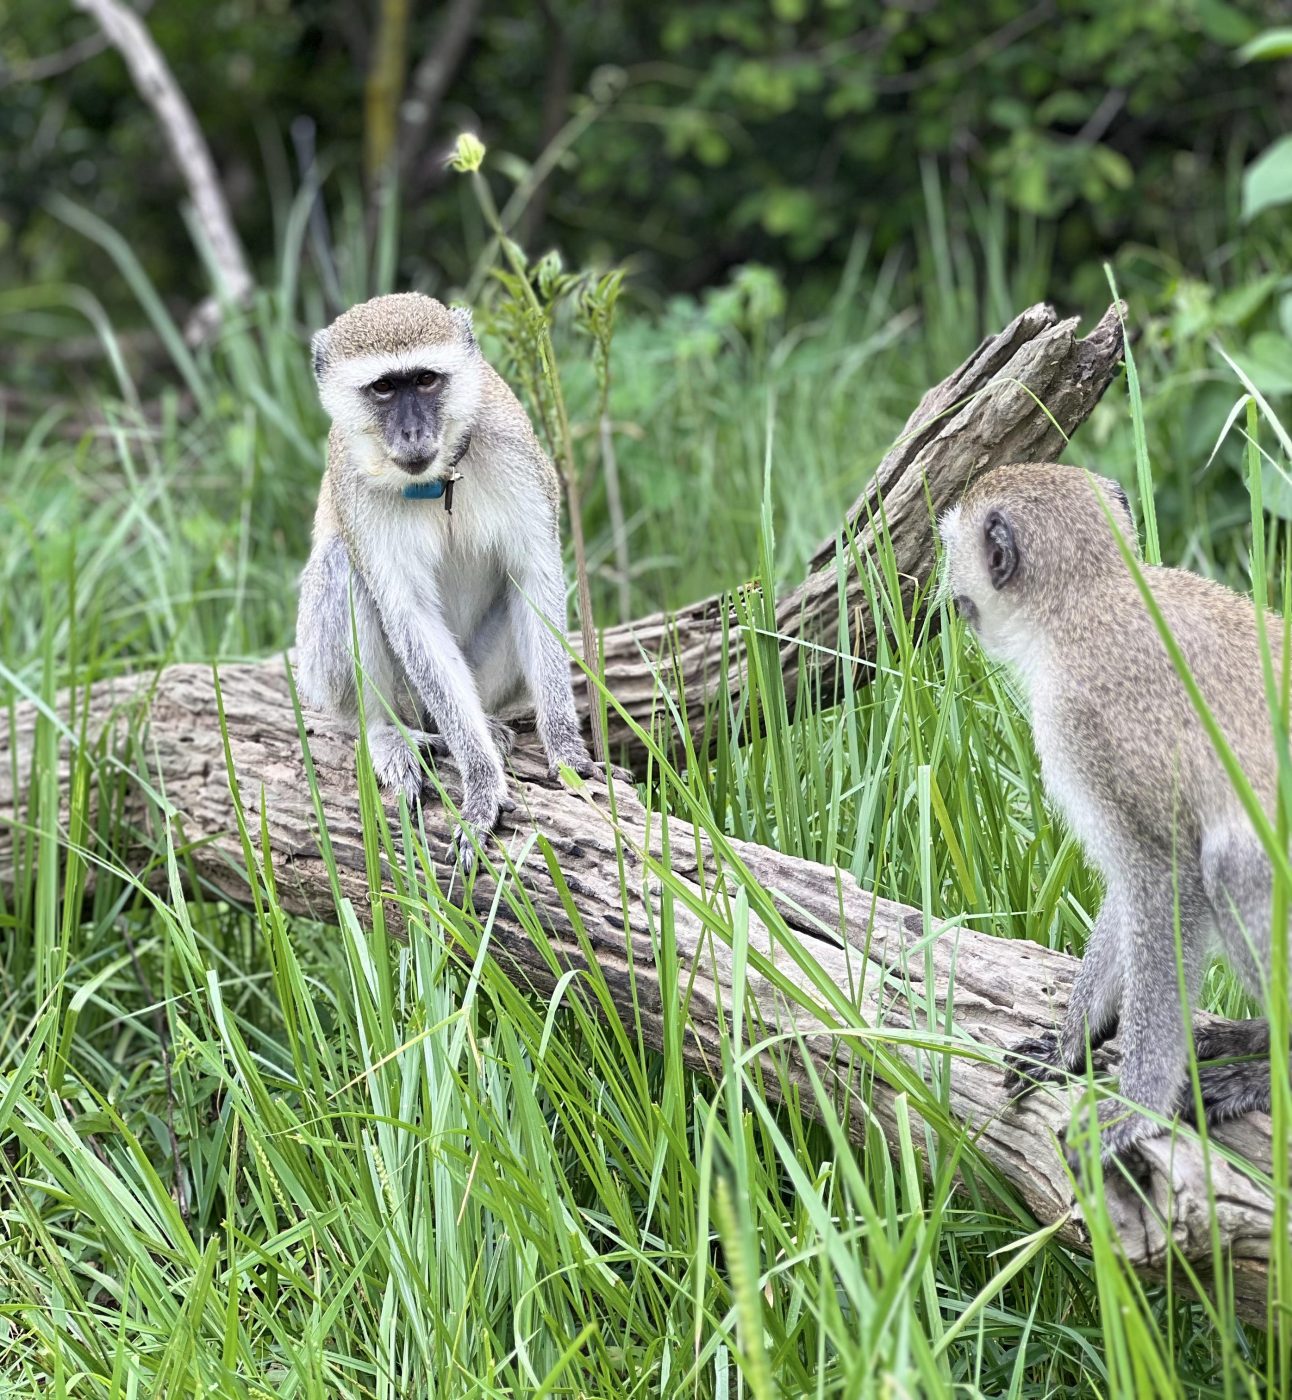 Two vervet monkeys sit on a log facing each other, in grassy surroundings